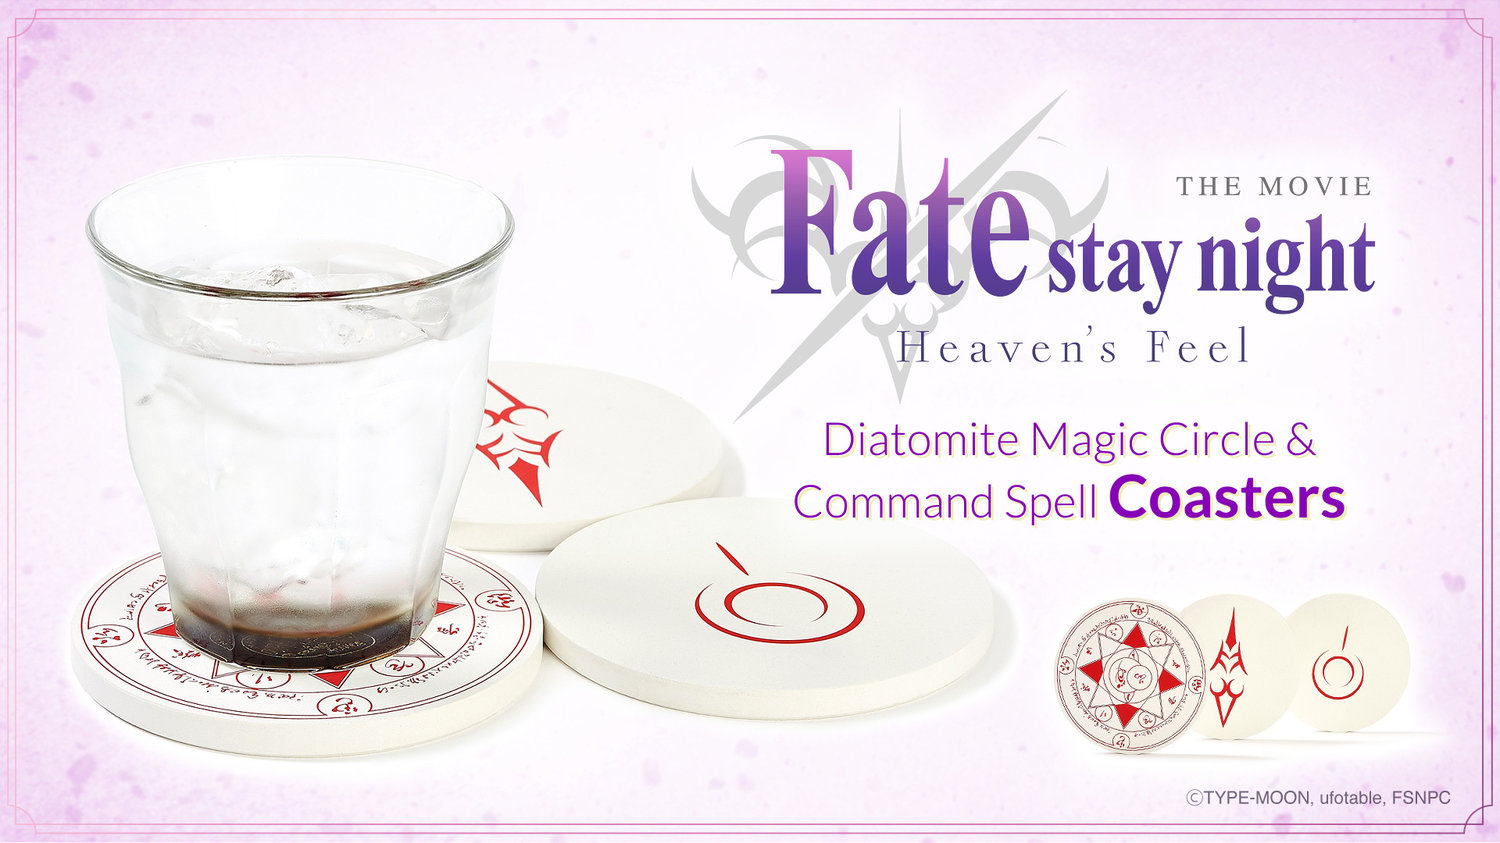 Fate/stay night [Heaven’s Feel] THE MOVIE: Diatomite Magic Circle & Command Spell Coasters